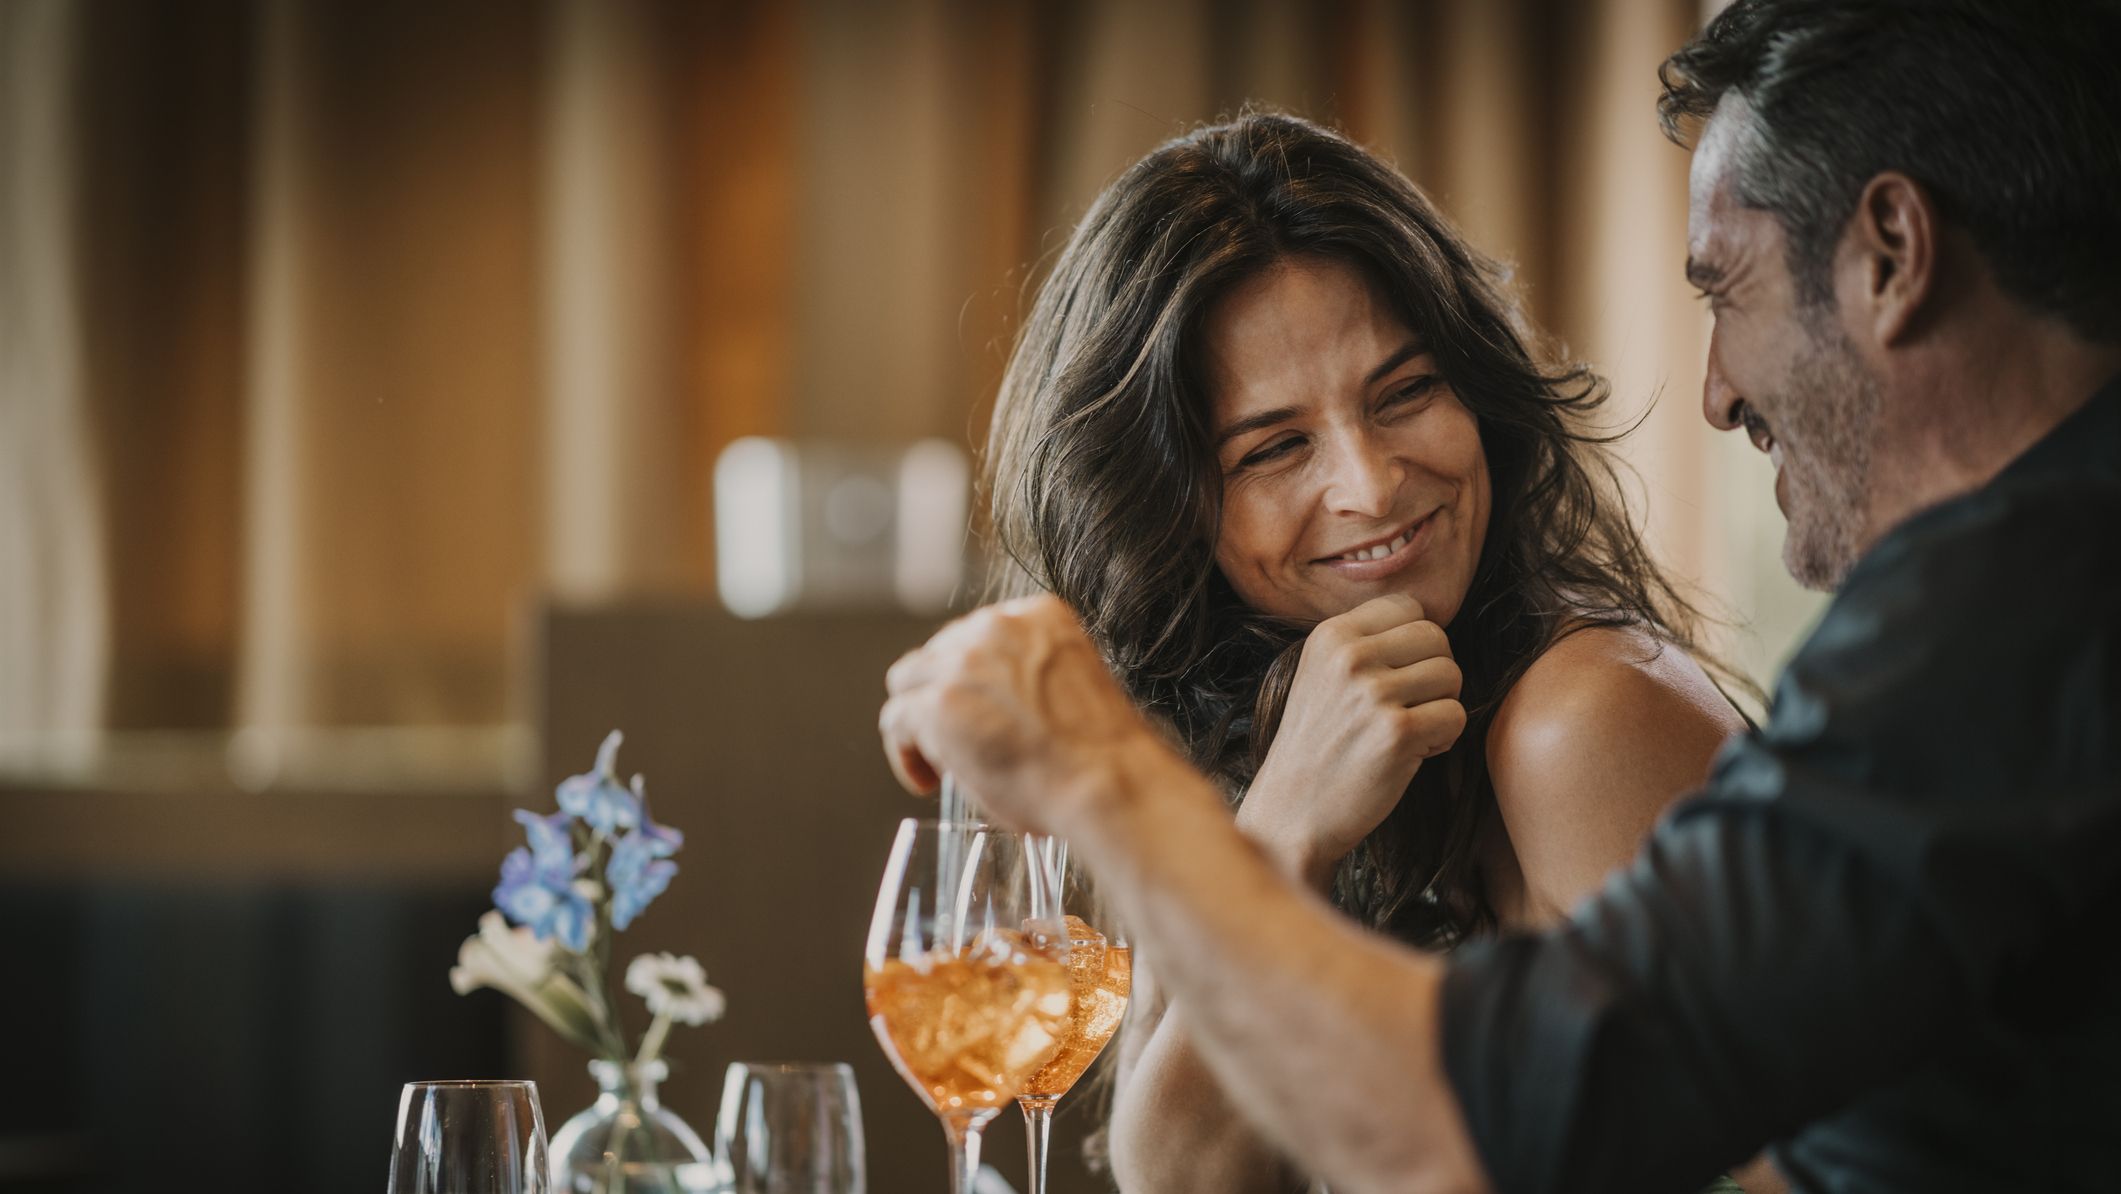 11 Reasons Why Blind Dates Can Lead to Successful Relationships